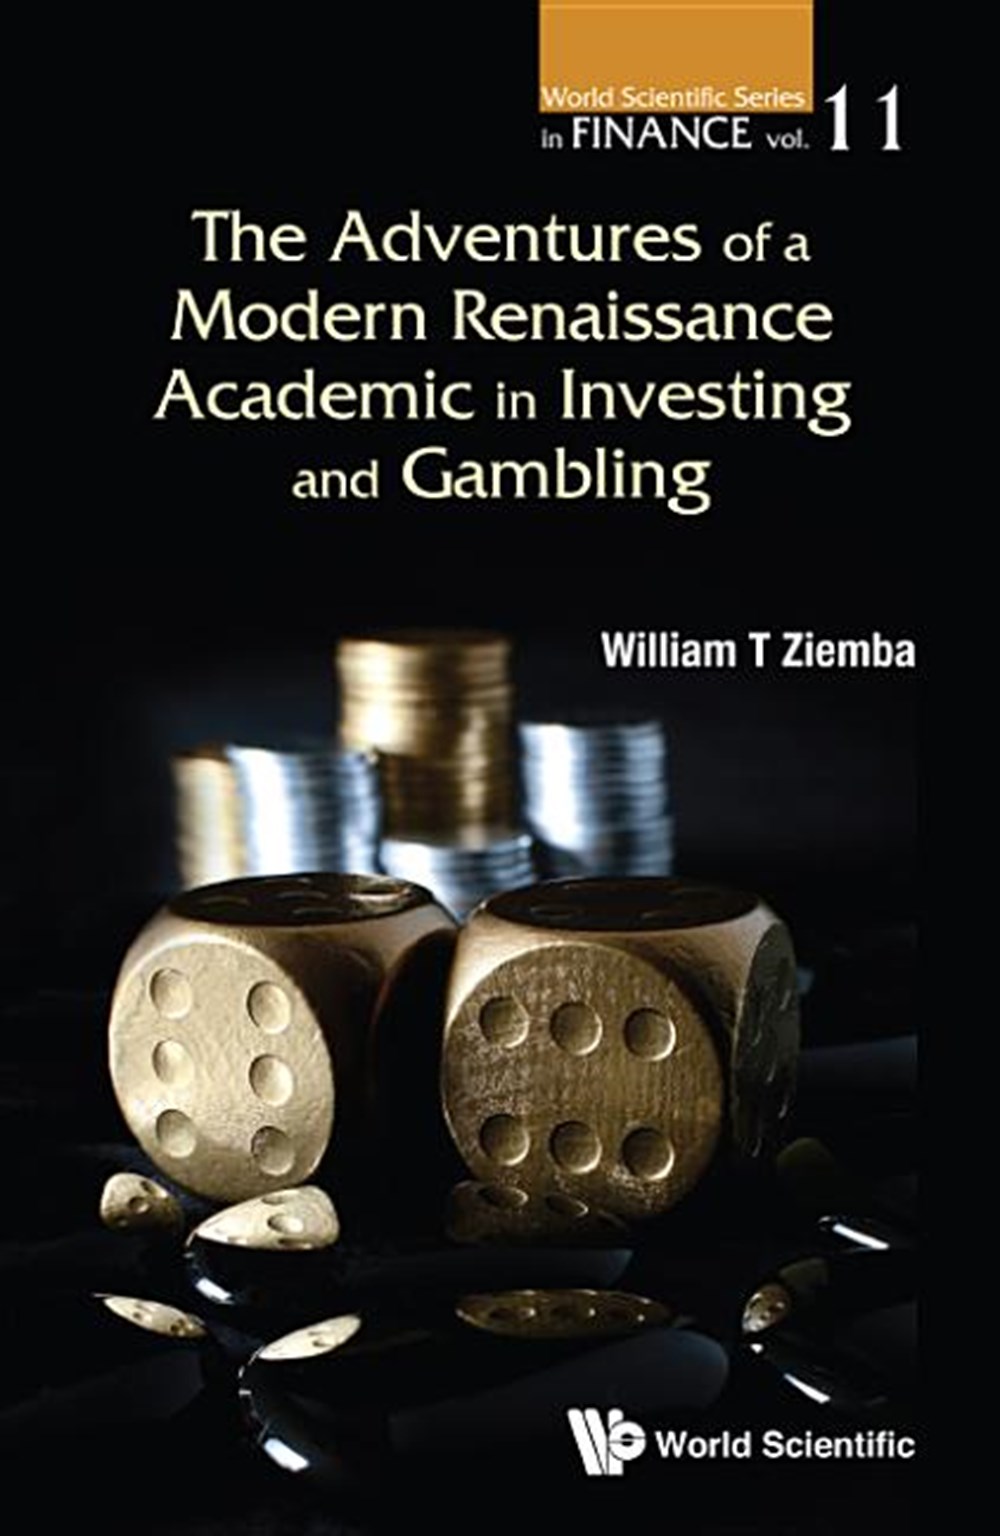 Adventures of a Modern Renaissance Academic in Investing and Gambling